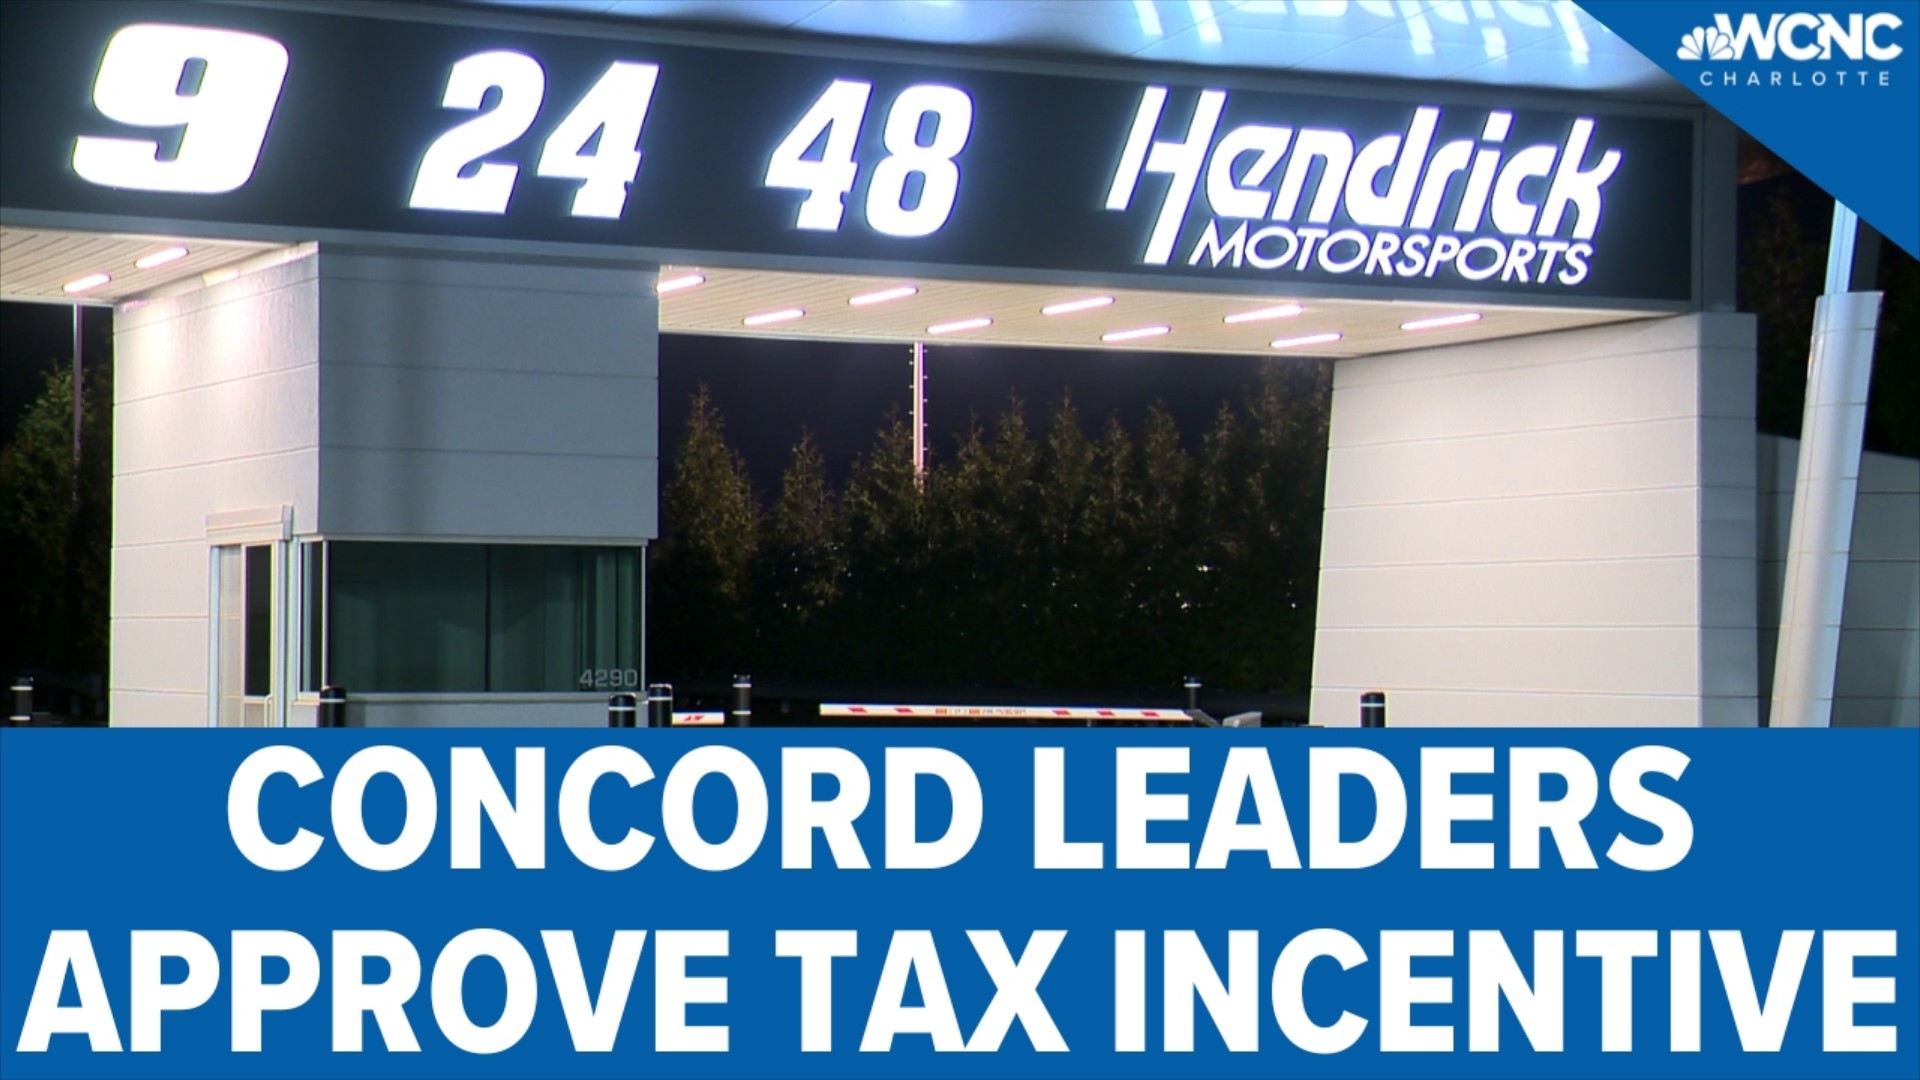 Concord City Council approved a tax incentive that will allow Hendrick Motorsports to build a $23.7 million manufacturing facility on its campus.